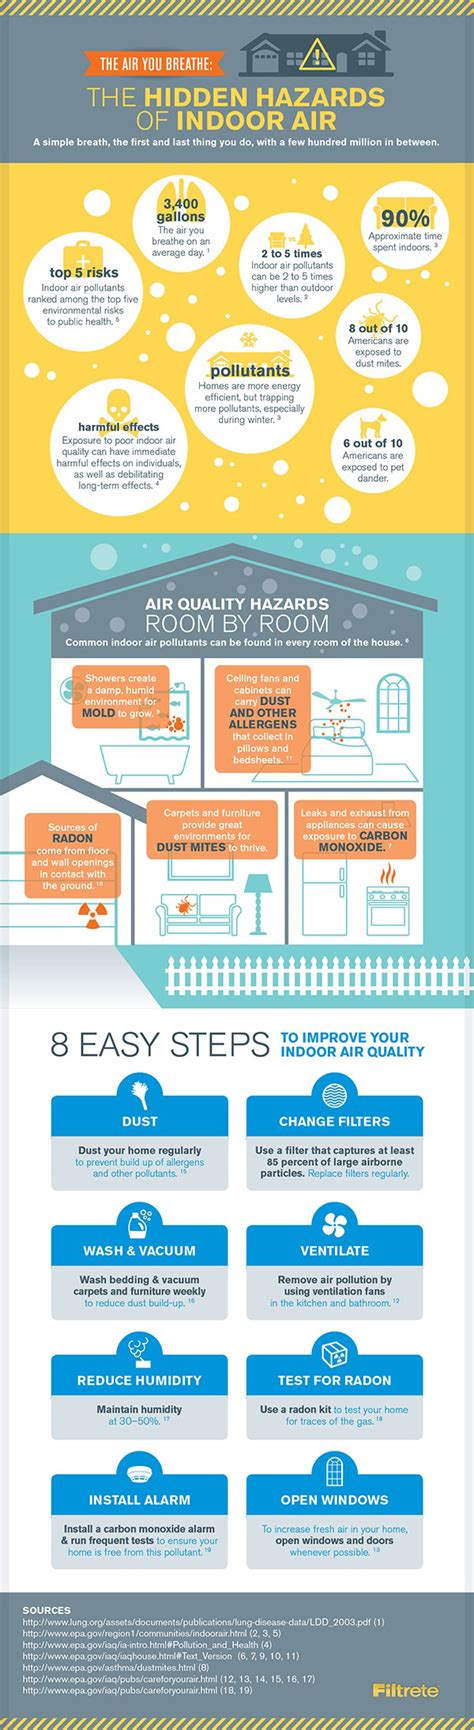 What Are You Doing To Help Improve Your Indoor Air Quality